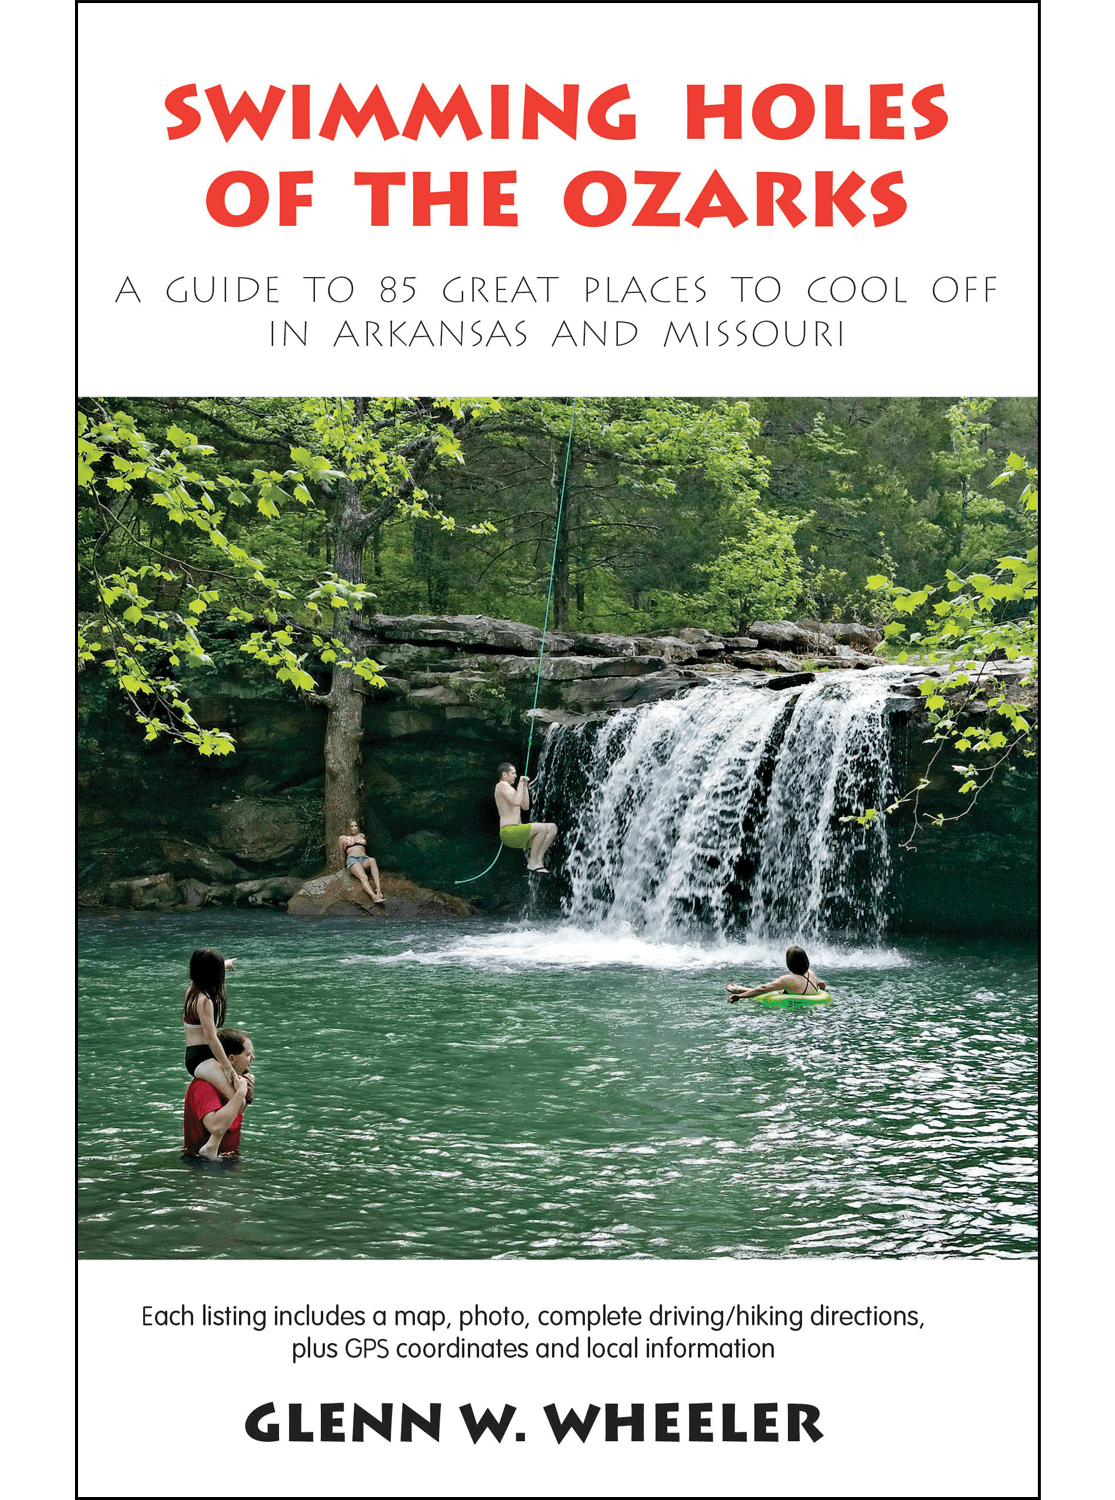 Explore the scenic Swimming Holes of the Ozarks located in the Buffalo River Area.